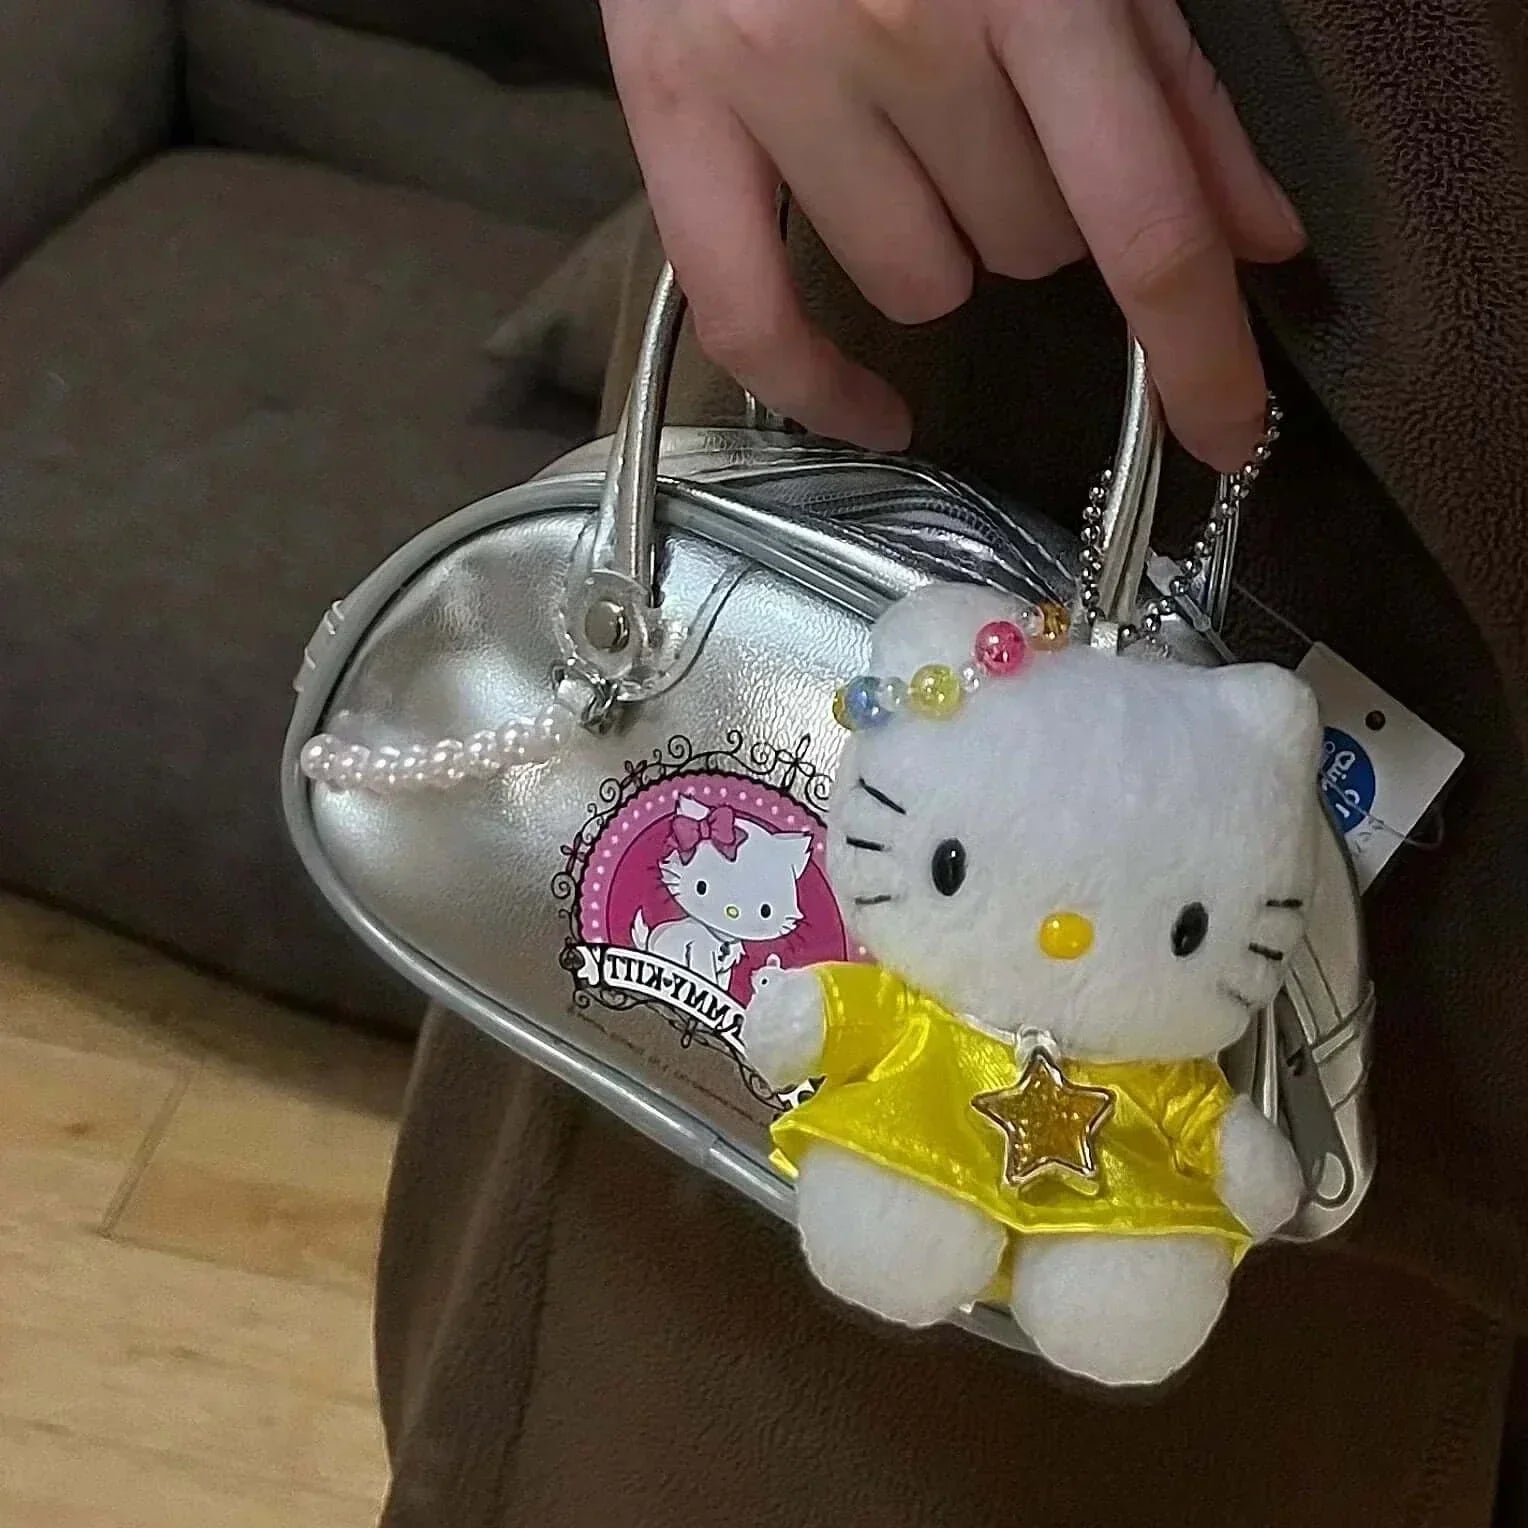 Charmmy Kitty Hand Bag with a shoulder strap - InKawaiiShop <span style="background-color:rgb(246,247,248);color:rgb(28,30,33);"> Charmmy Kitty Hand Bag with a shoulder strap , bag , InKawaiiShop , Hello Kitty, sanrio , inkawaiishop.com </span>